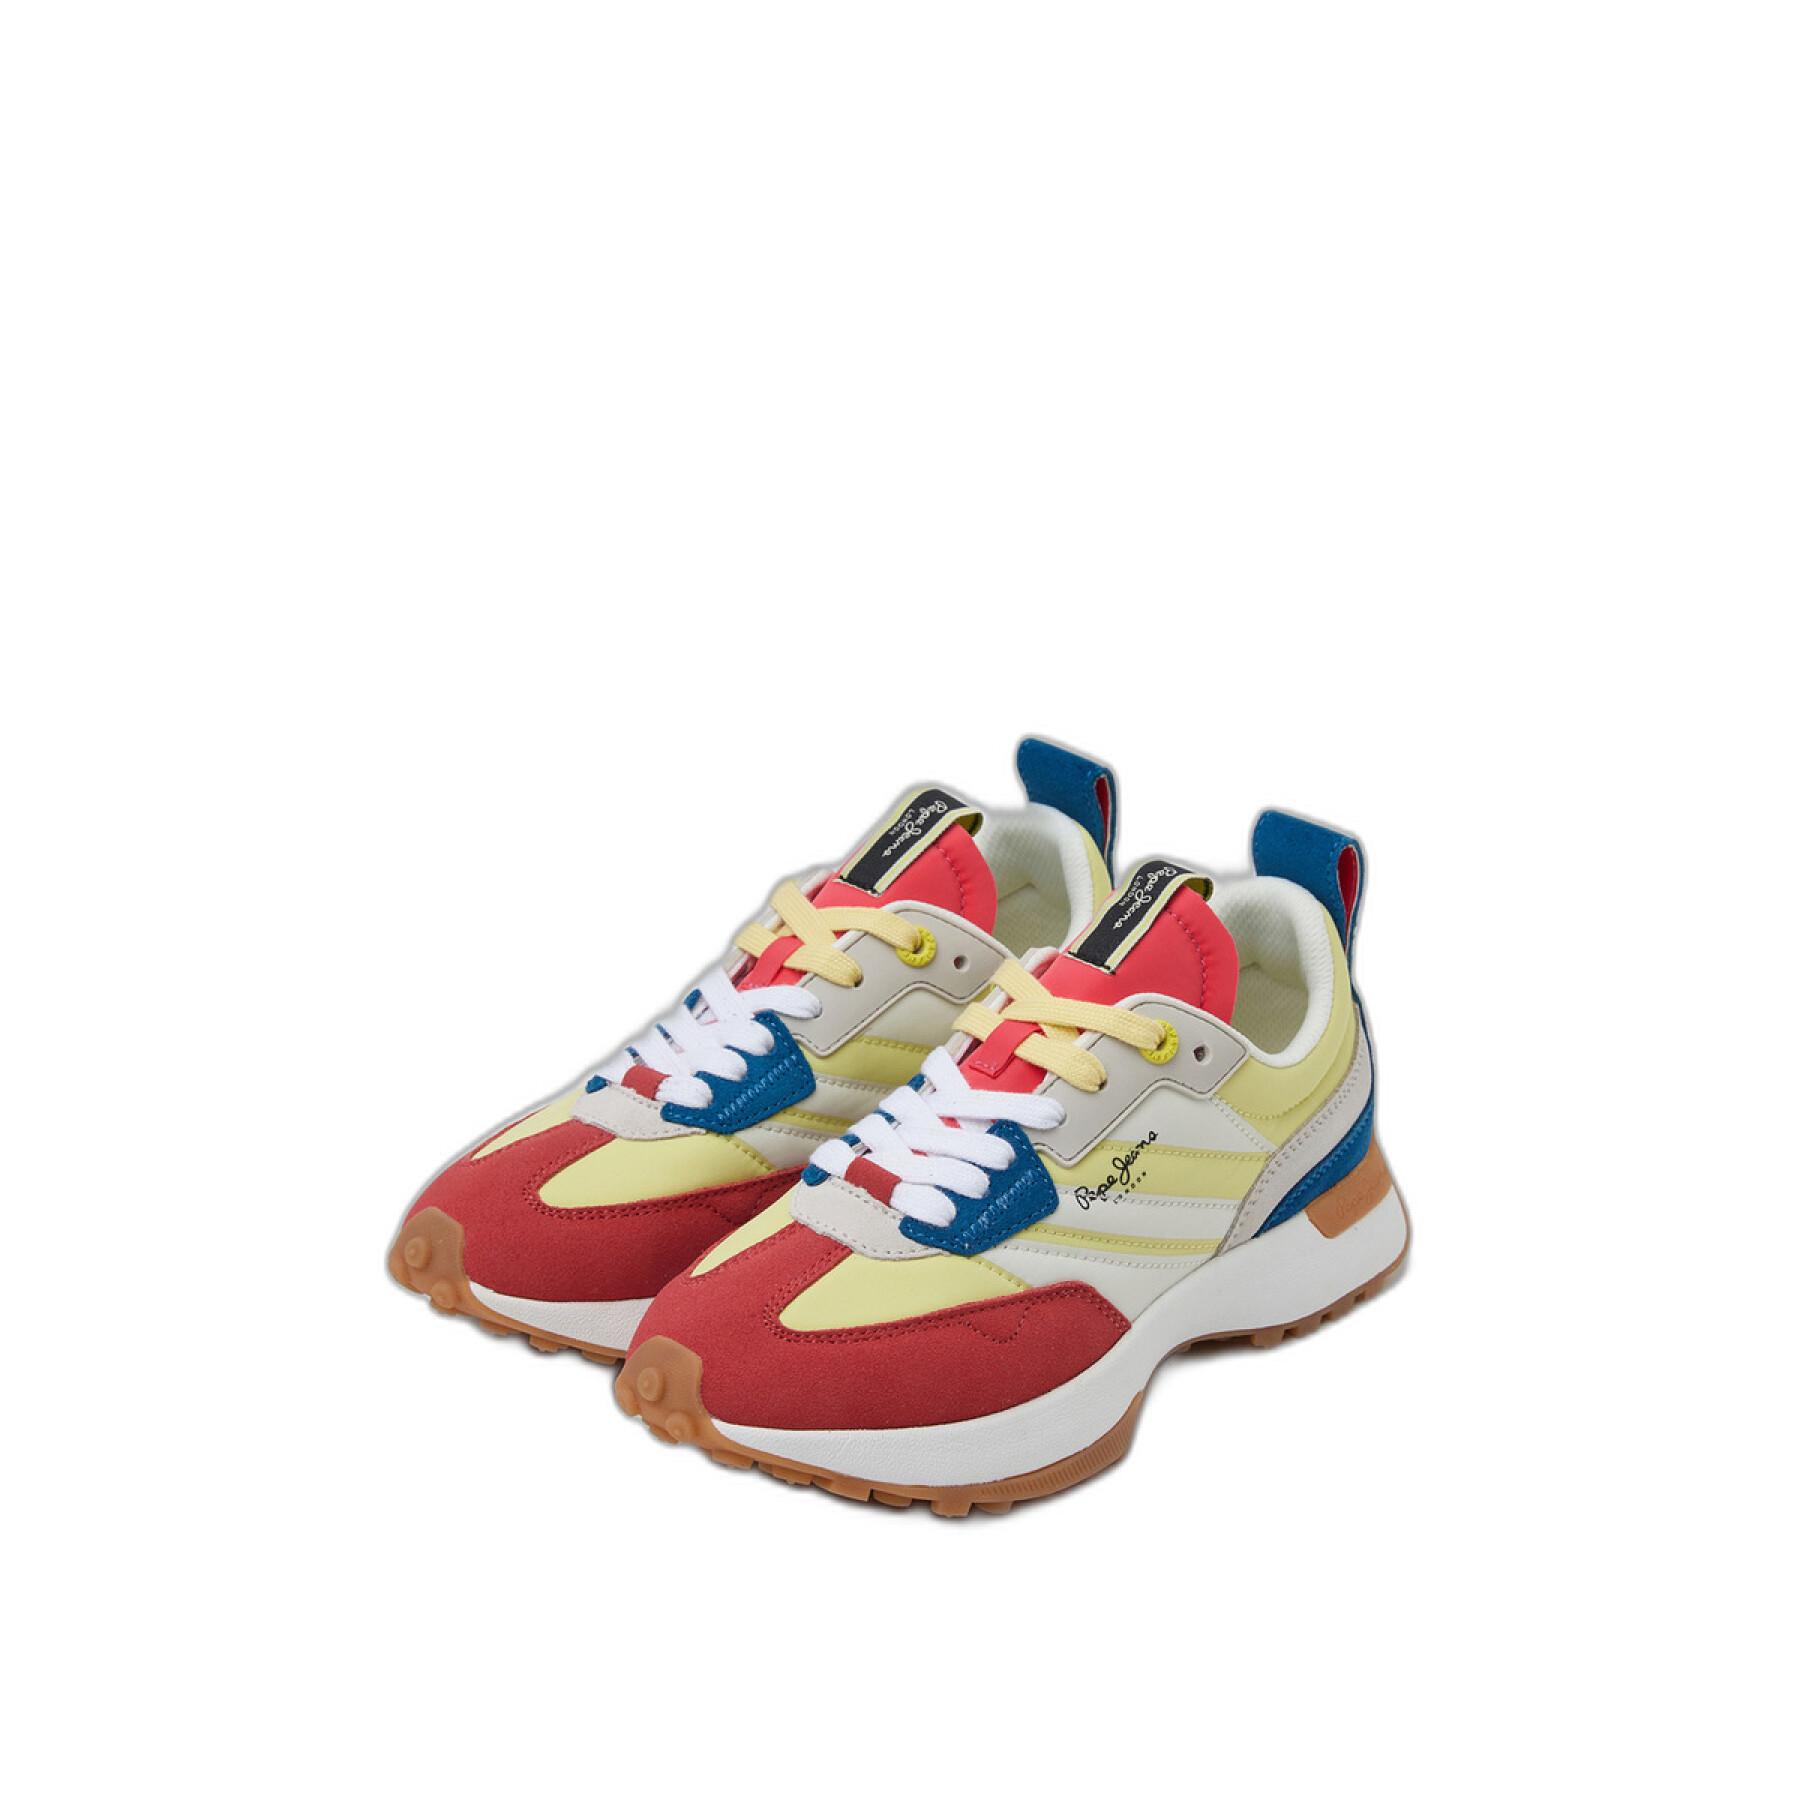 Women's sneakers Pepe Jeans Lucky Print